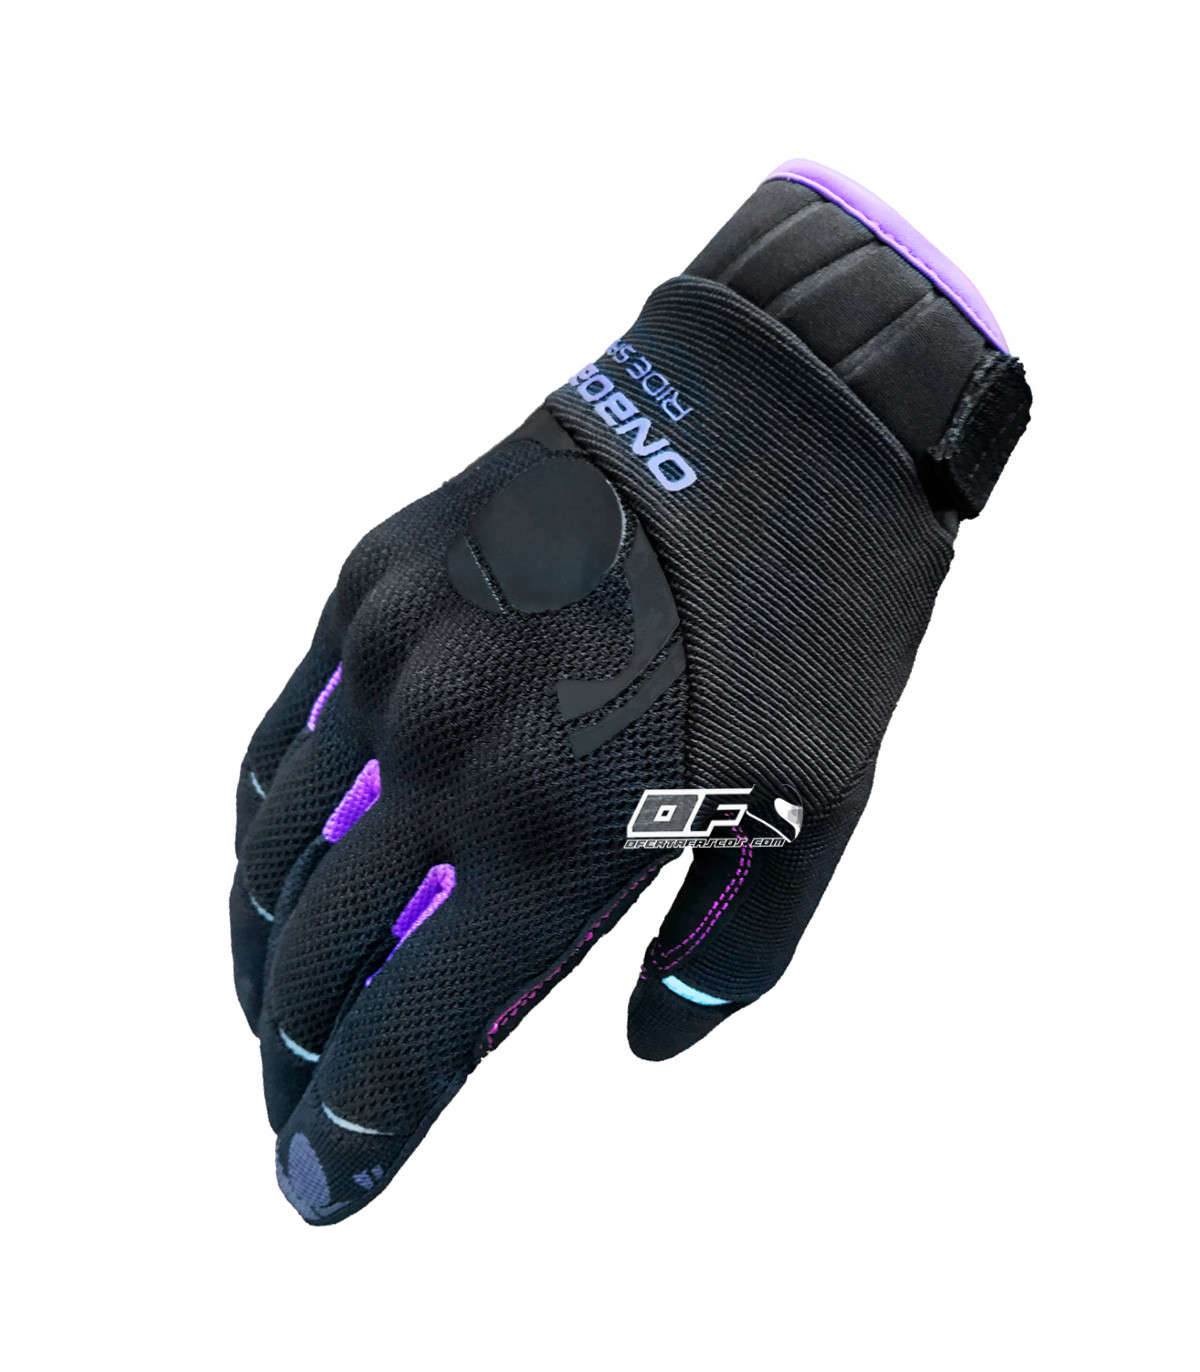 Guantes moto mujer invierno Onboard amy